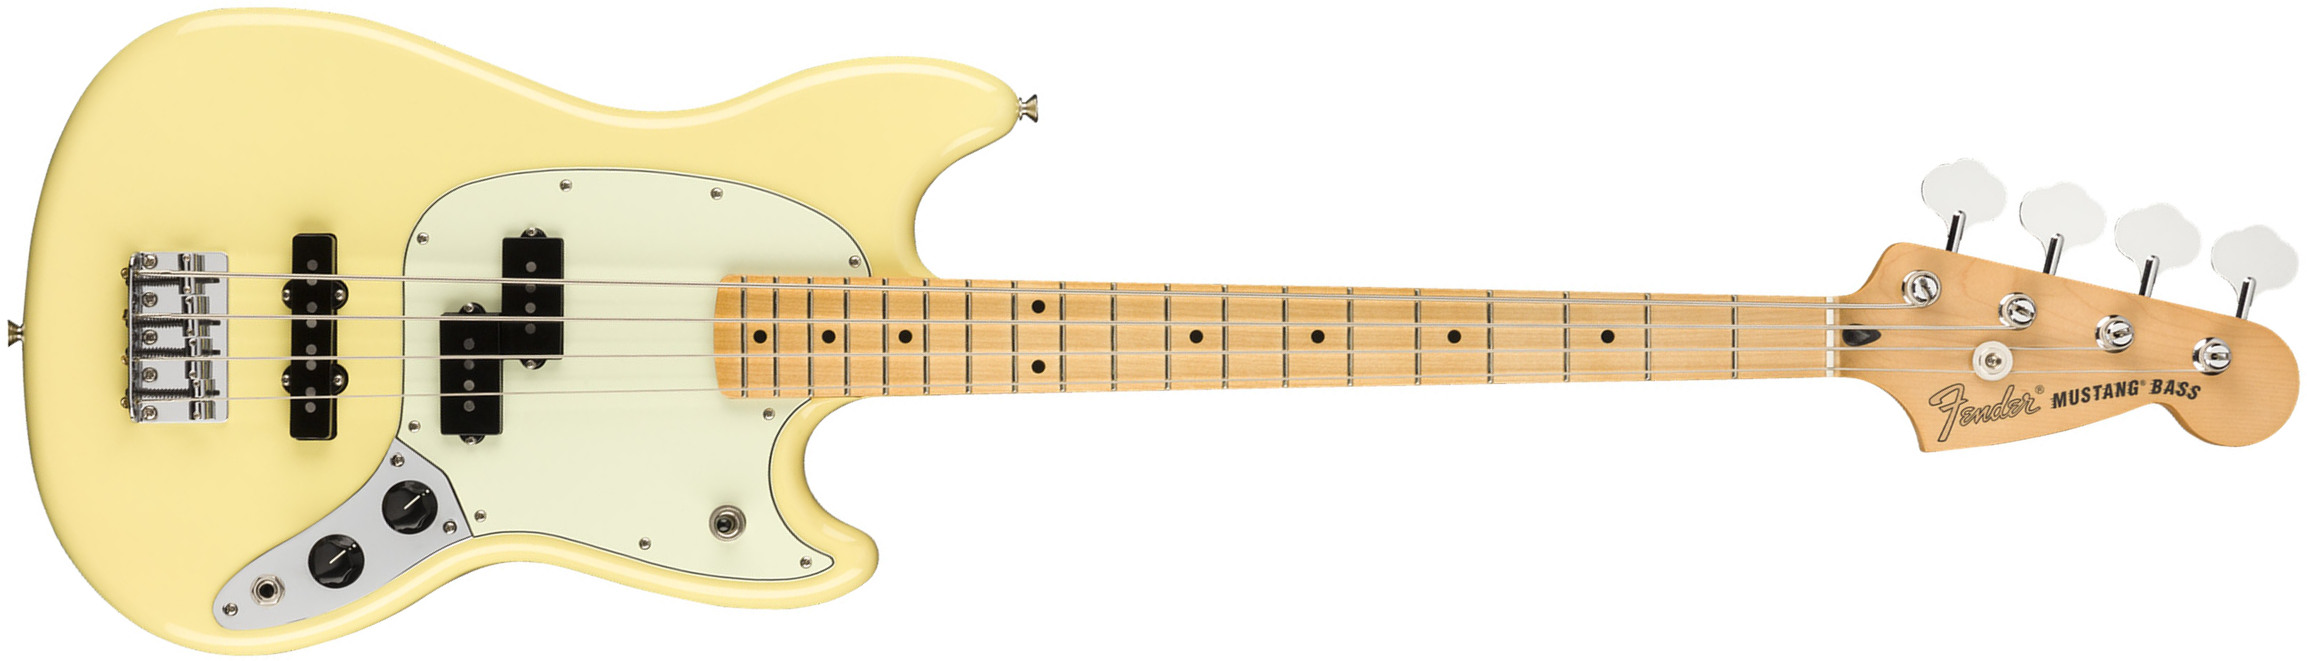 Fender Player Mustang Bass Pj Ltd Mex Mn - Canary - Basse Électrique Solid Body - Main picture